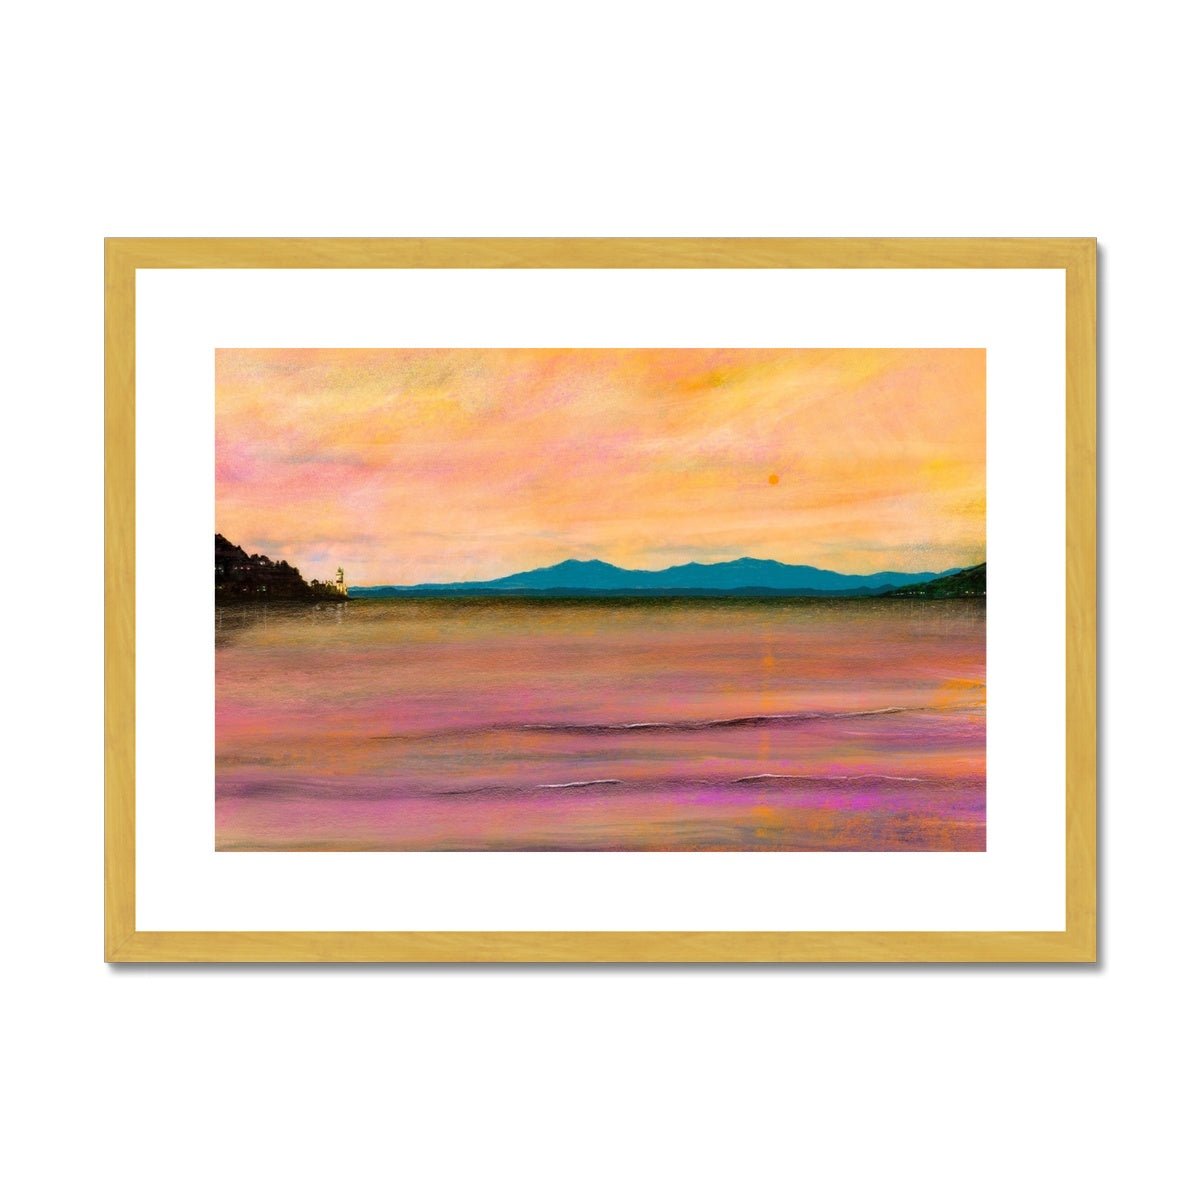 Dusk Over Arran & The Cloch Lighthouse Painting | Antique Framed & Mounted Prints From Scotland-Antique Framed & Mounted Prints-Arran Art Gallery-A2 Landscape-Gold Frame-Paintings, Prints, Homeware, Art Gifts From Scotland By Scottish Artist Kevin Hunter